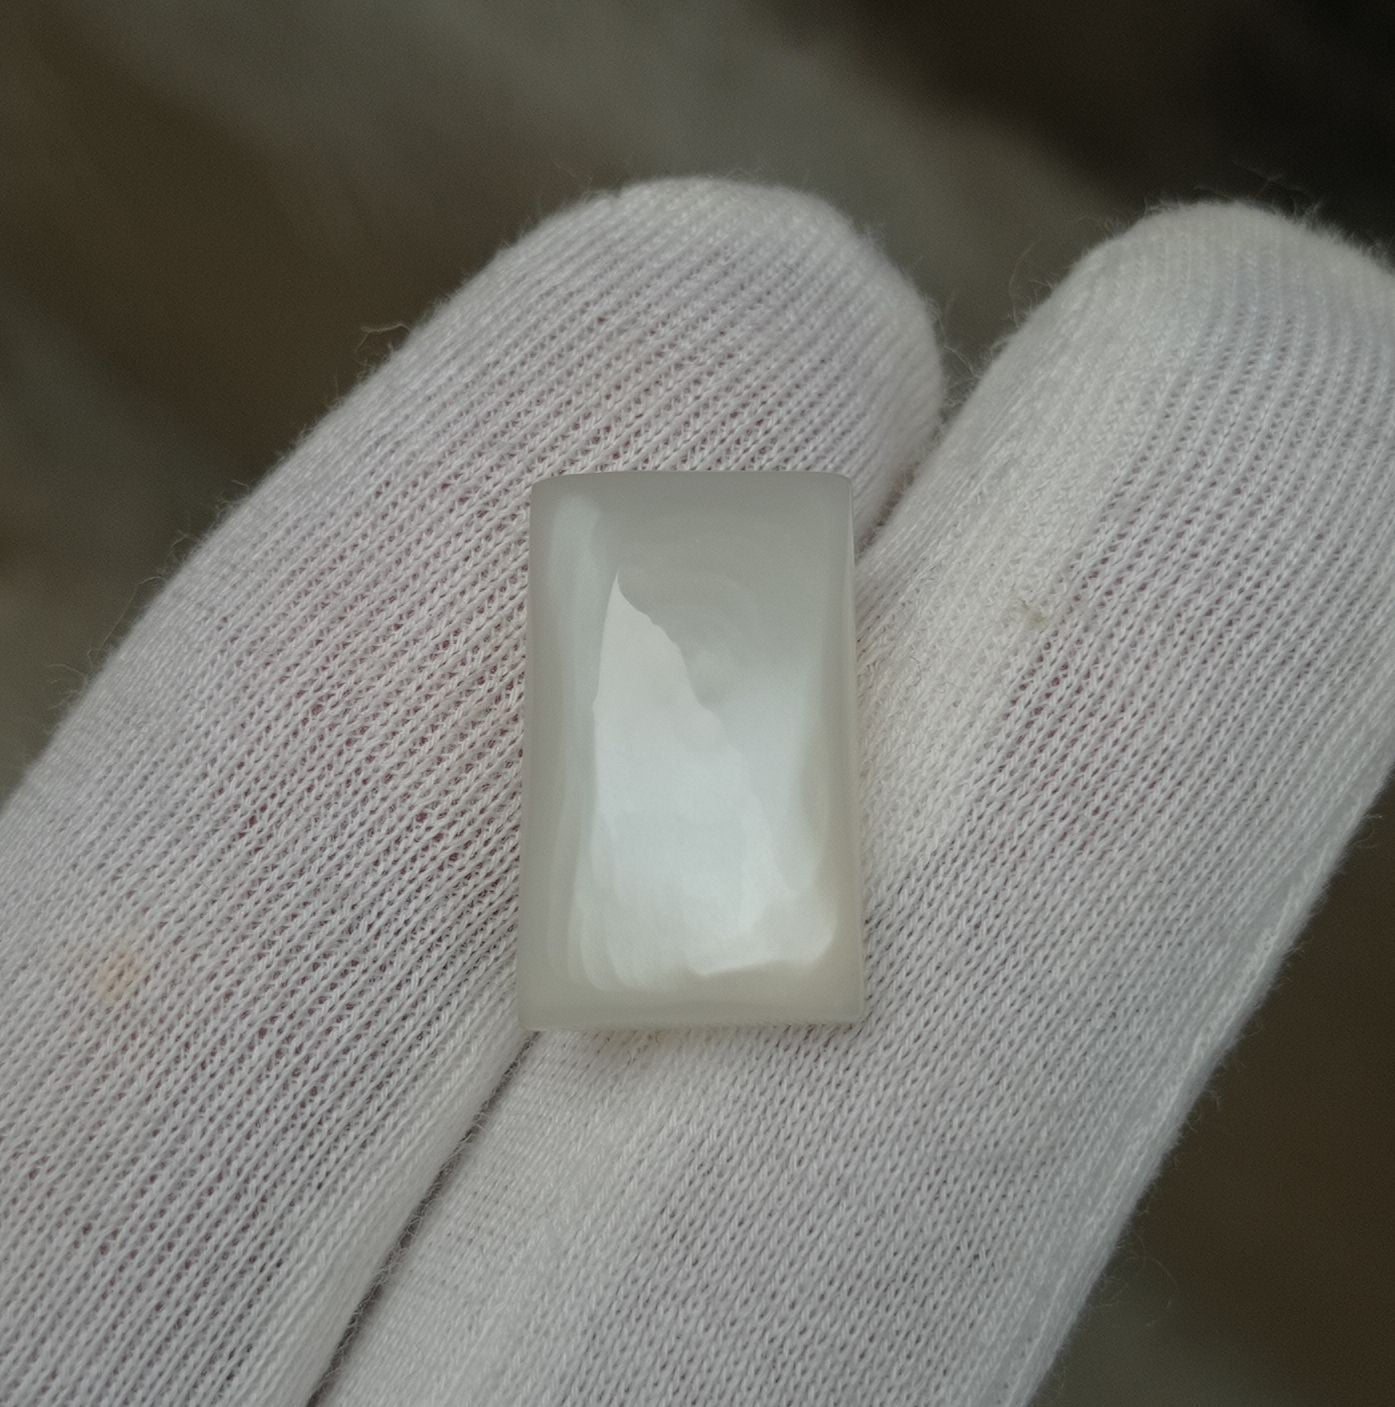 10.9ct Milky Moonstone with White Sheen - Adularia Moonstone - June Birthstone - 17.5x10x6mm